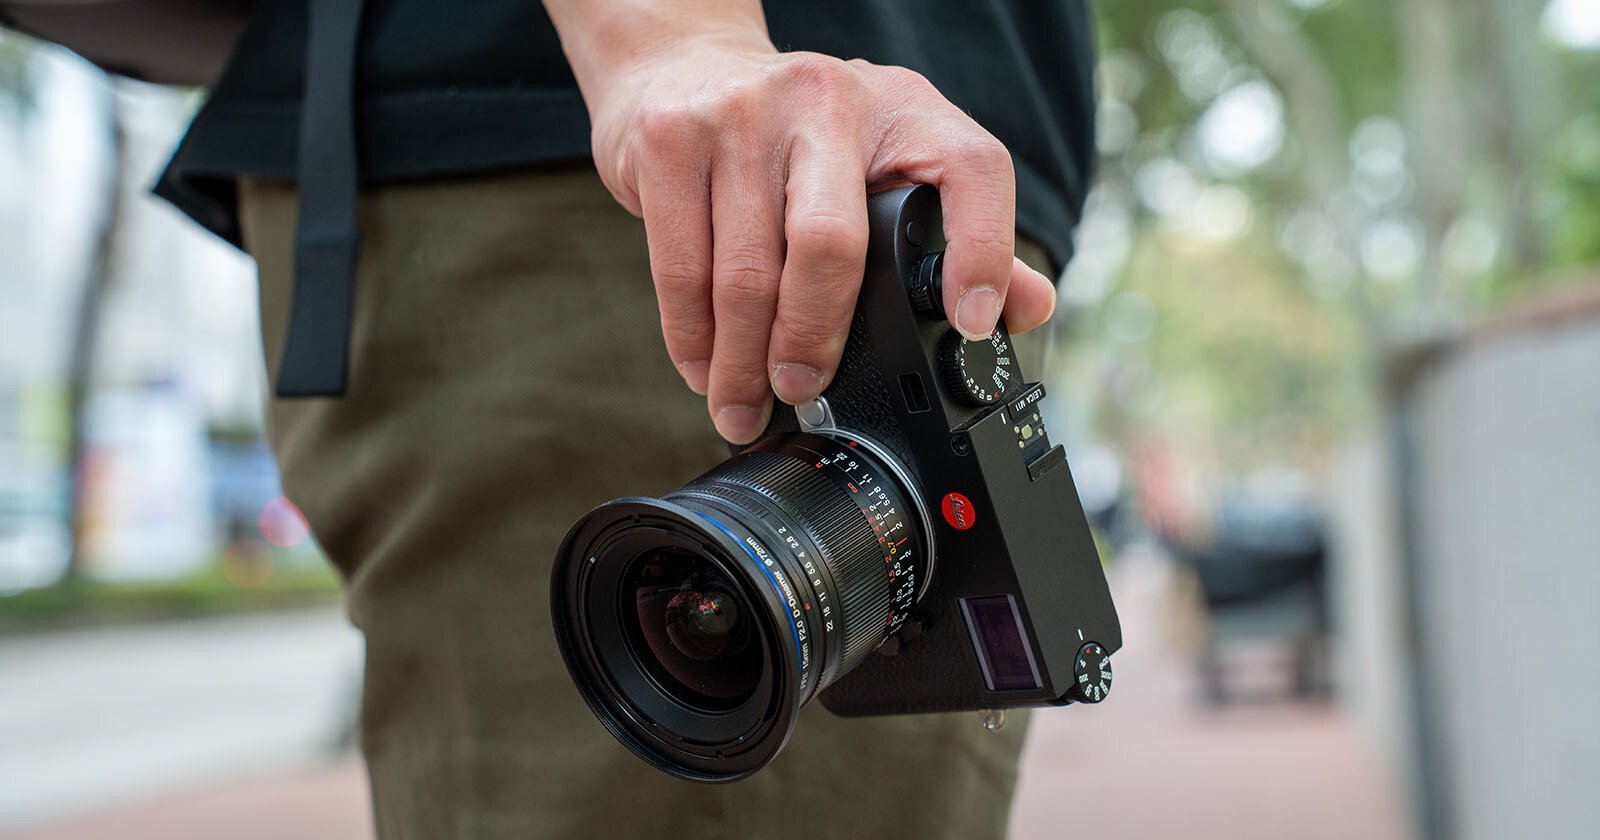 The Laowa 15mm f/2 Zero-D is a Compact, Ultra-Wide Lens for Leica M